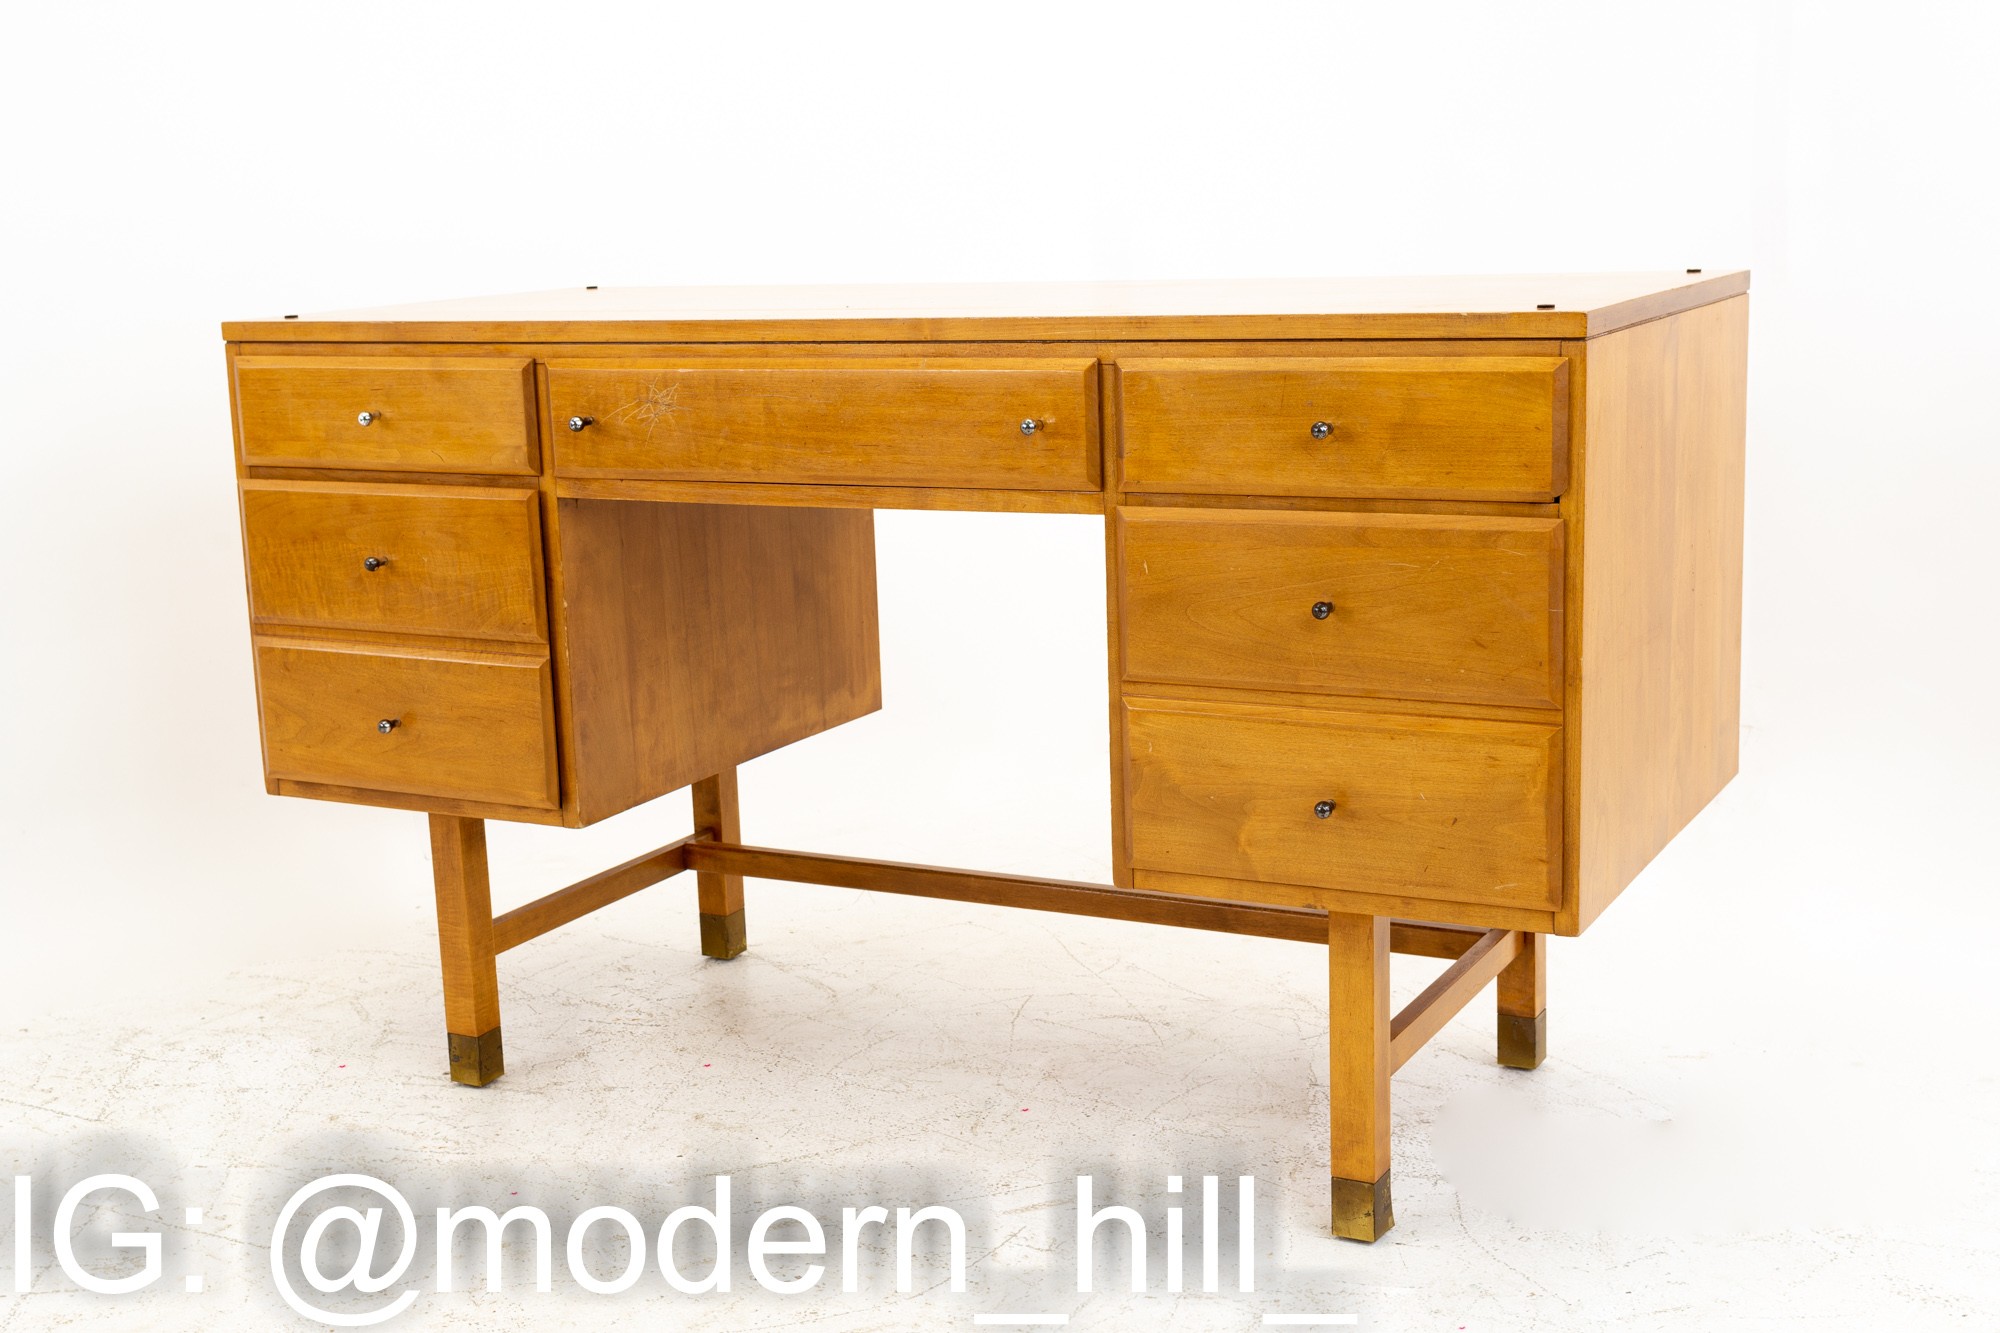 Conant Ball Style Mid Century Maple Solid Wood Double Sided Desk